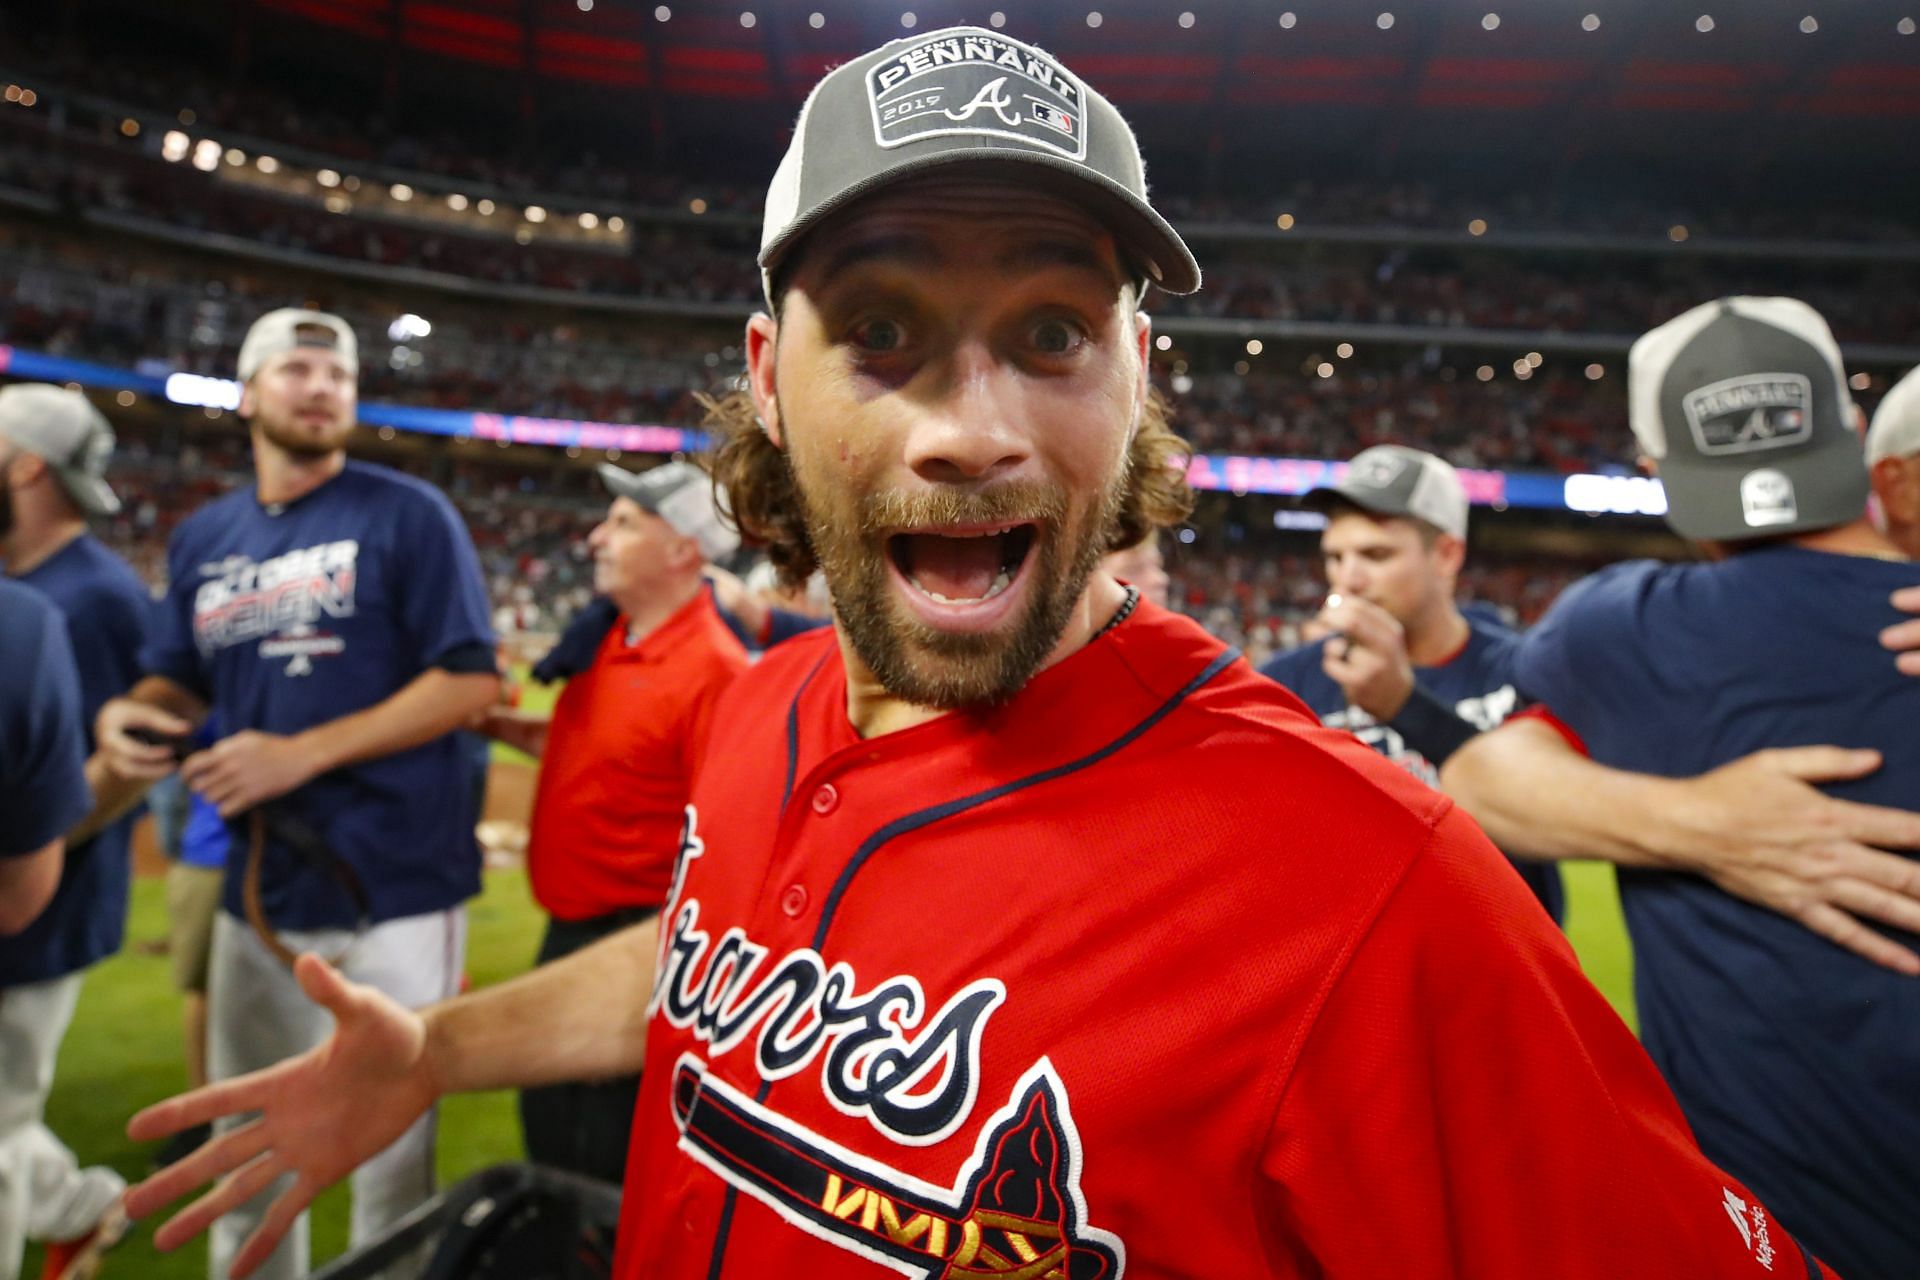 Braves players and fans are having trouble telling Dansby Swanson and Charlie  Culberson apart